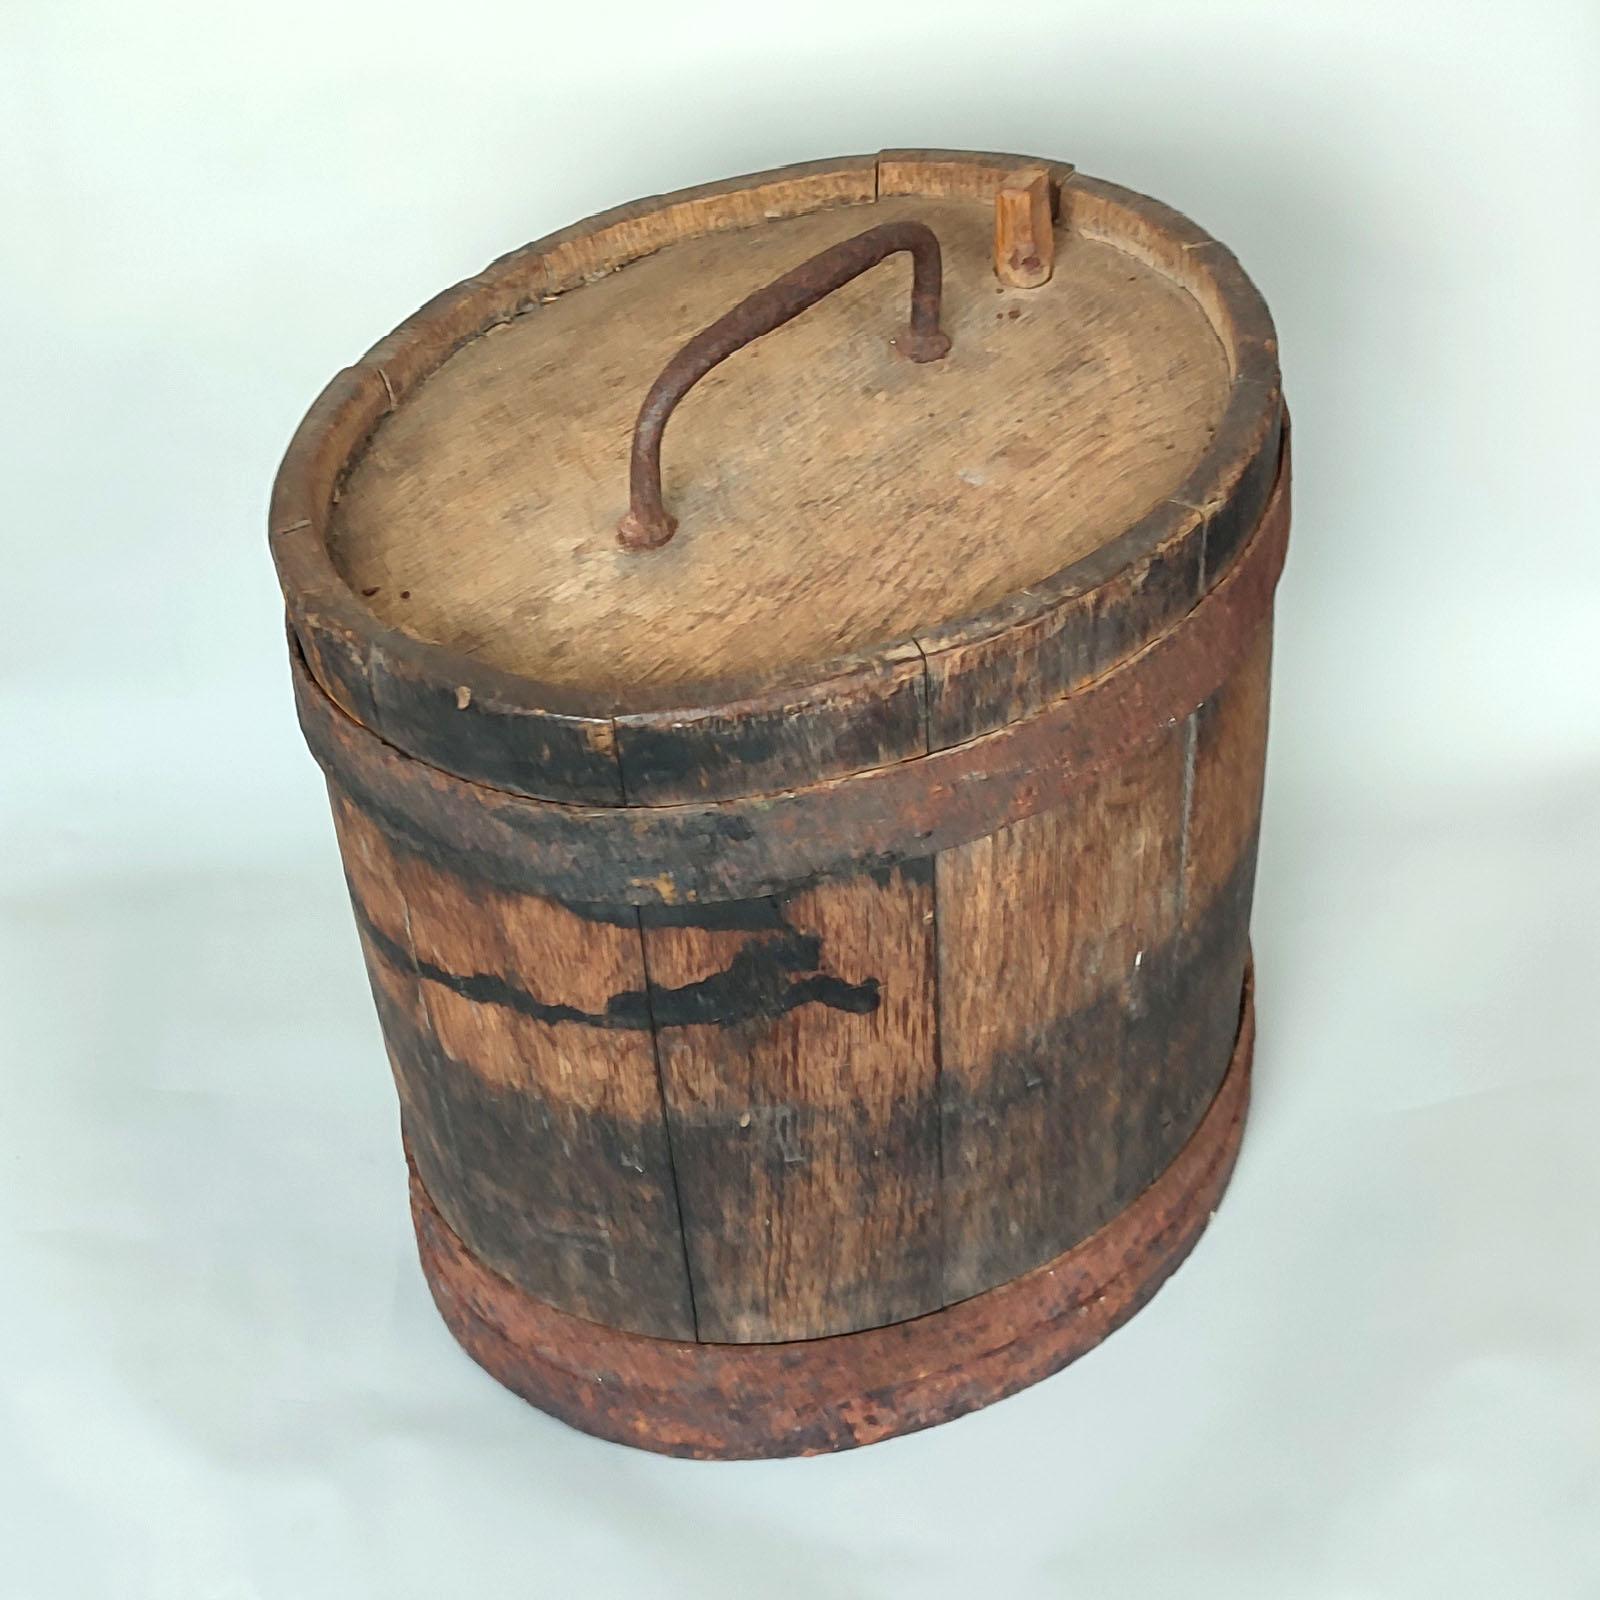 19th century Scandinavian wooden cask made of oak staves that are held together with iron banding. 
Wonderful piece to add to your collection of Folk Art, early Scandinavian farm primitives. In good condition consistent with its age and quite